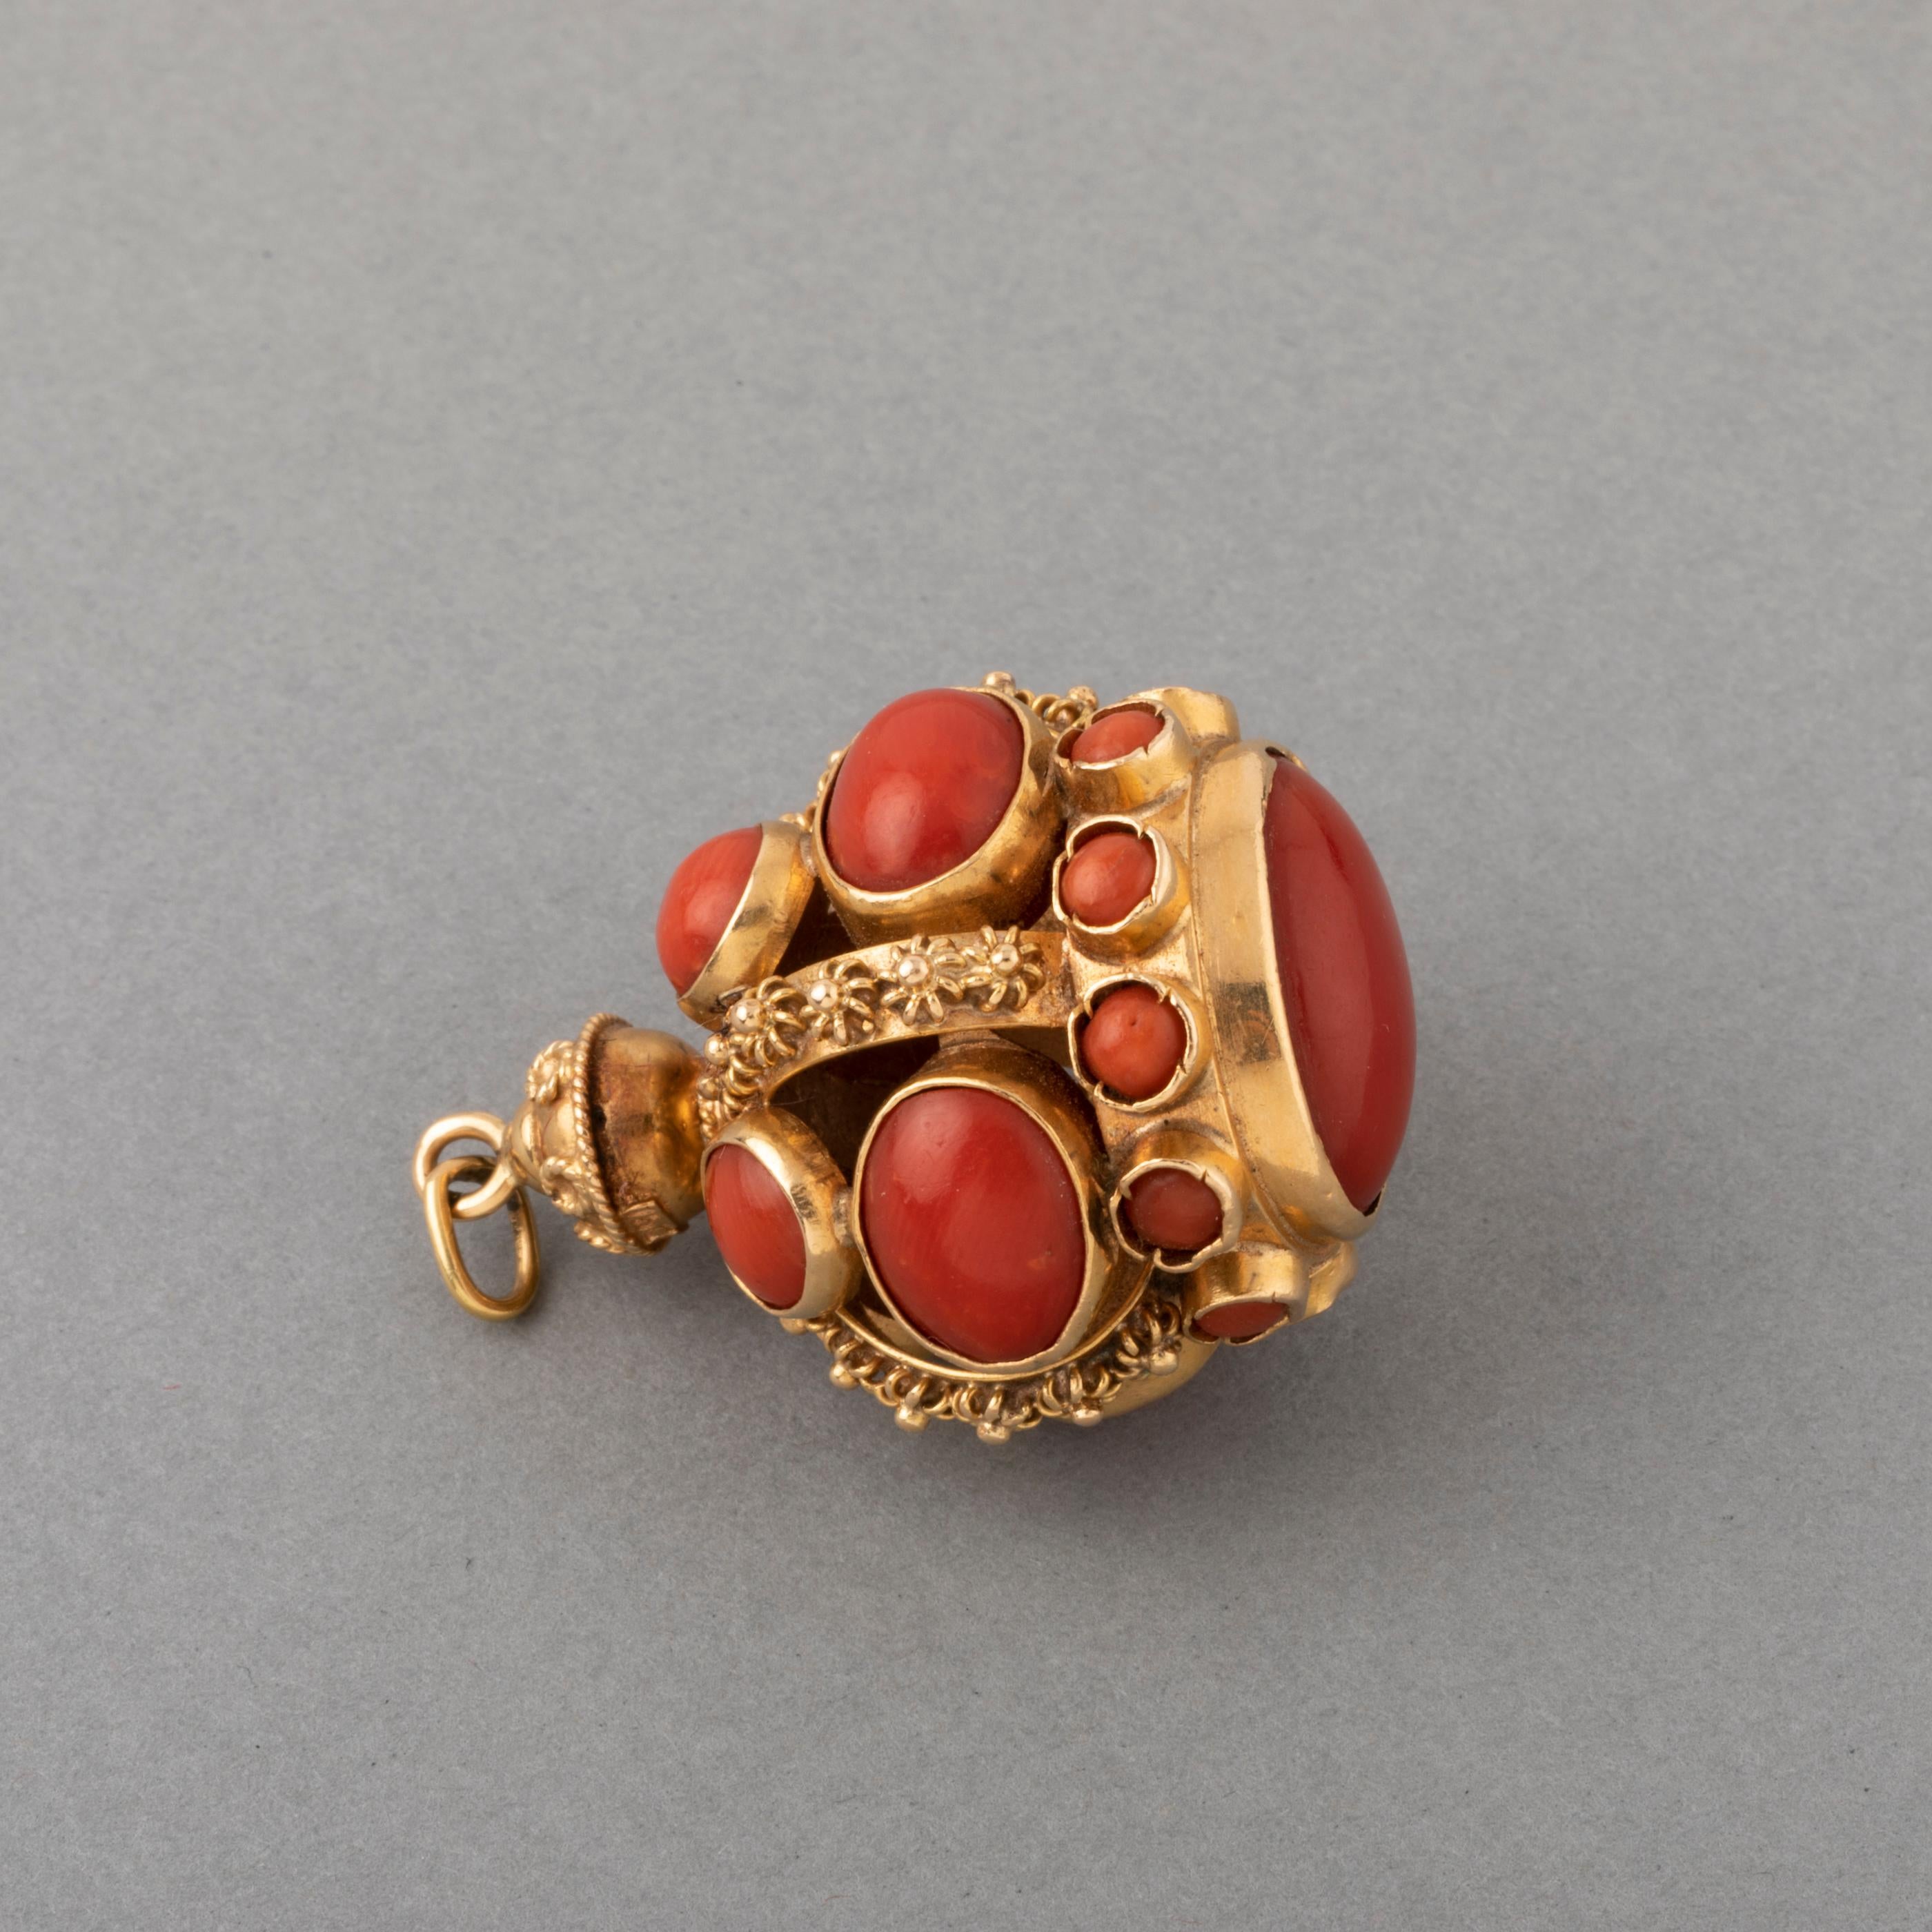 Women's Gold and Coral Vintage Charm